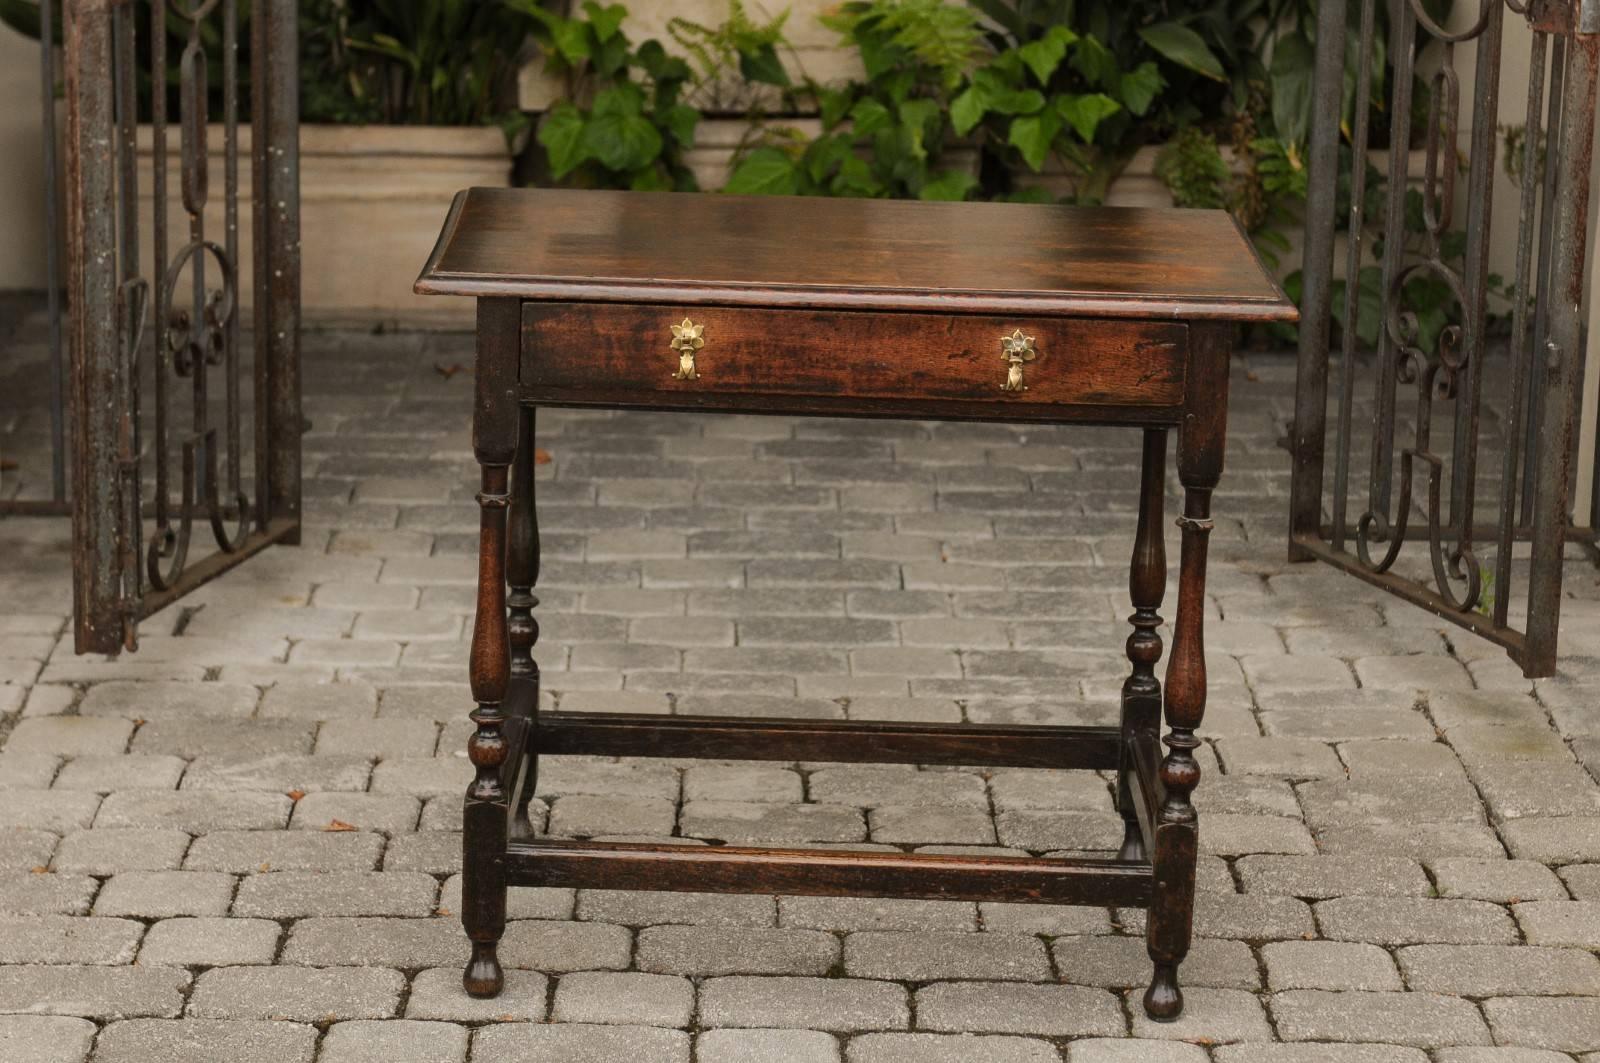 An English William and Mary style oak side table from the early 19th century with single drawer, turned legs and cross stretcher. This English oak side table features a rectangular top with bevelled edges, sitting above a long, single hand-cut